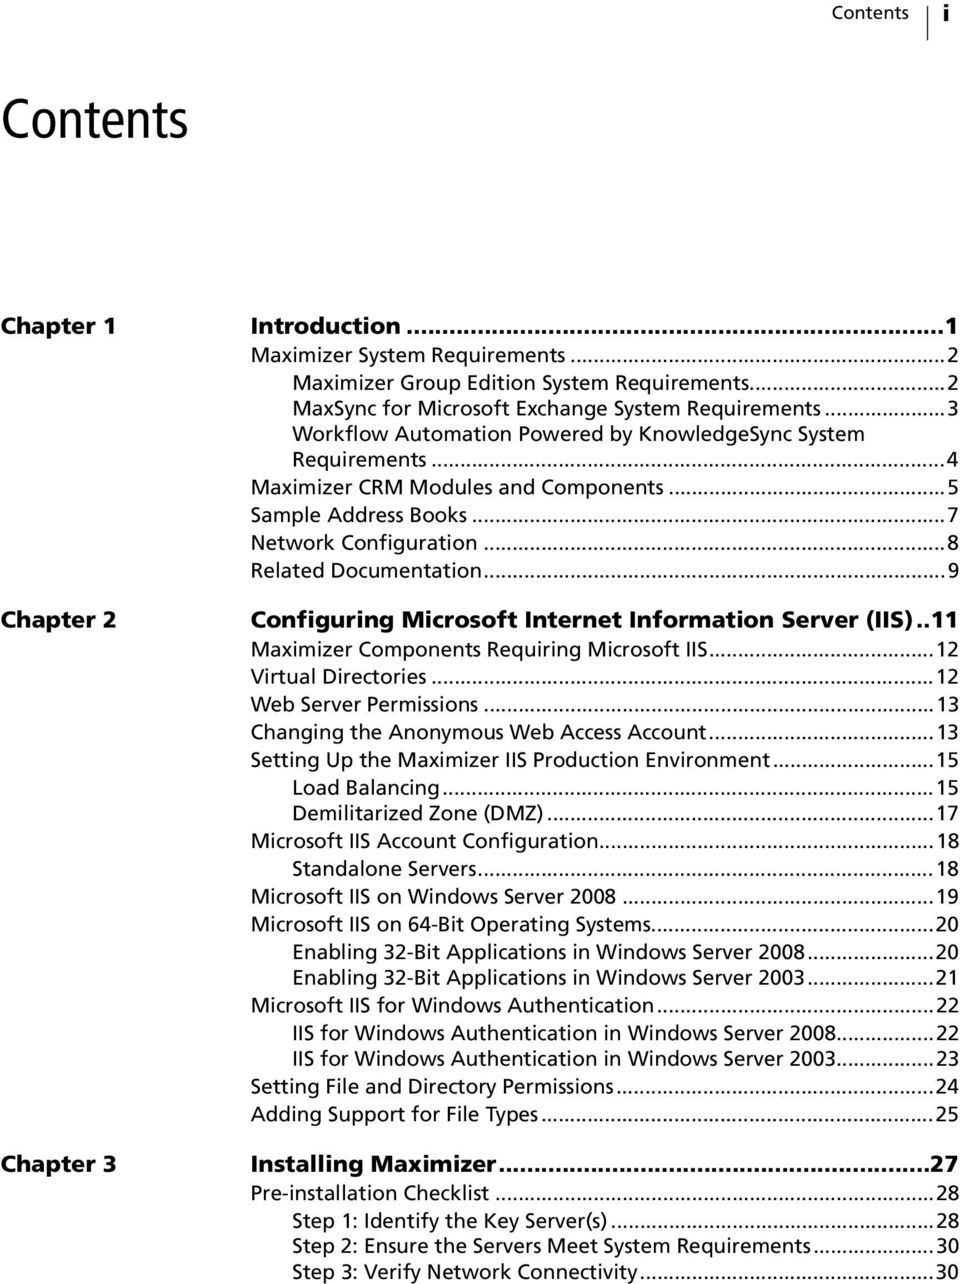 ..9 Chapter 2 Chapter 3 Configuring Microsoft Internet Information Server (IIS)..11 Maximizer Components Requiring Microsoft IIS...12 Virtual Directories...12 Web Server Permissions.